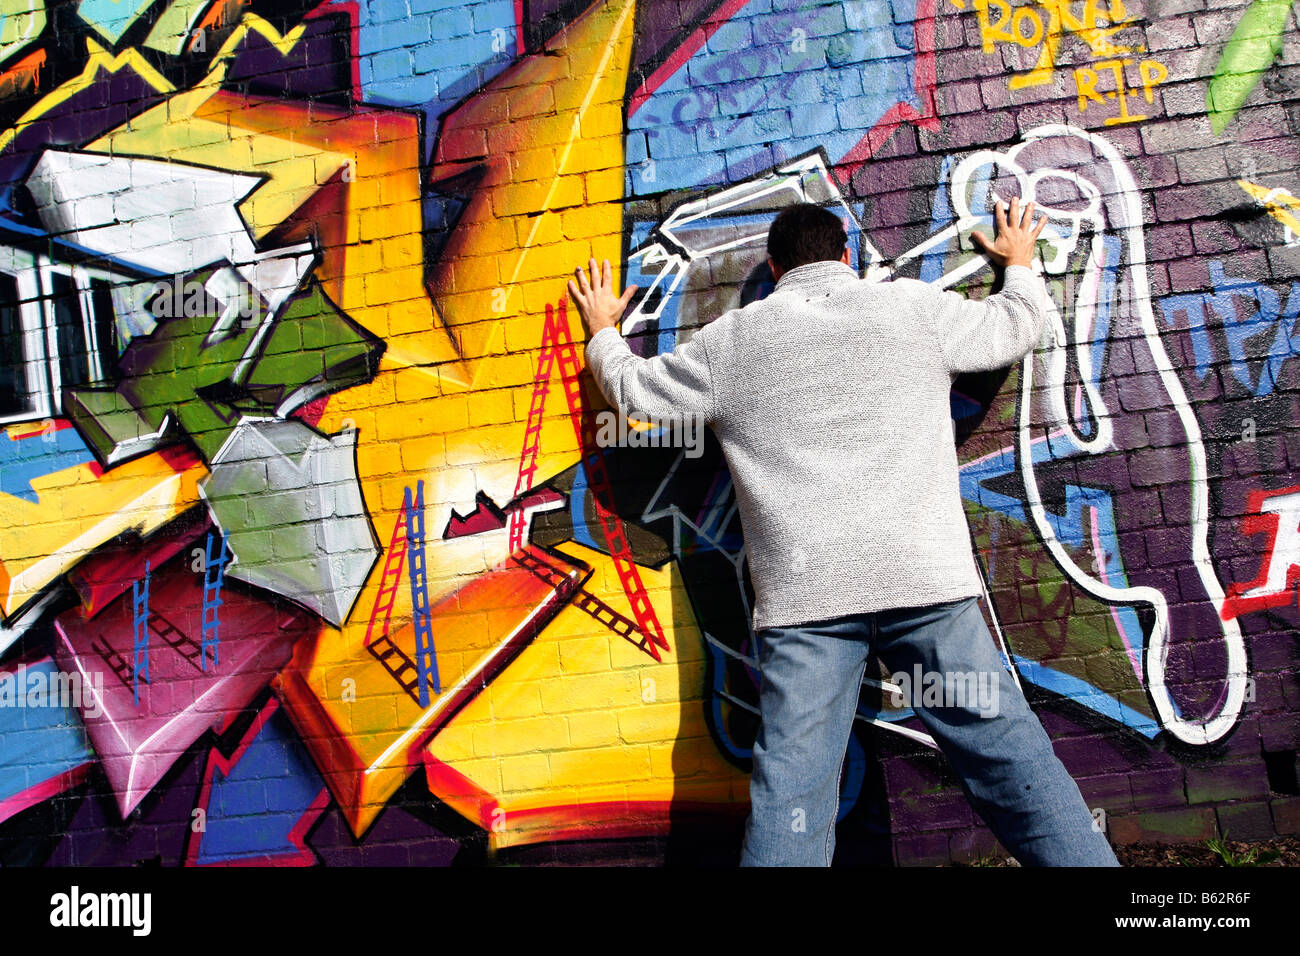 man standing against and facing a wall which has graffiti art on it graffiti spray paint brick wall art painting Stock Photo